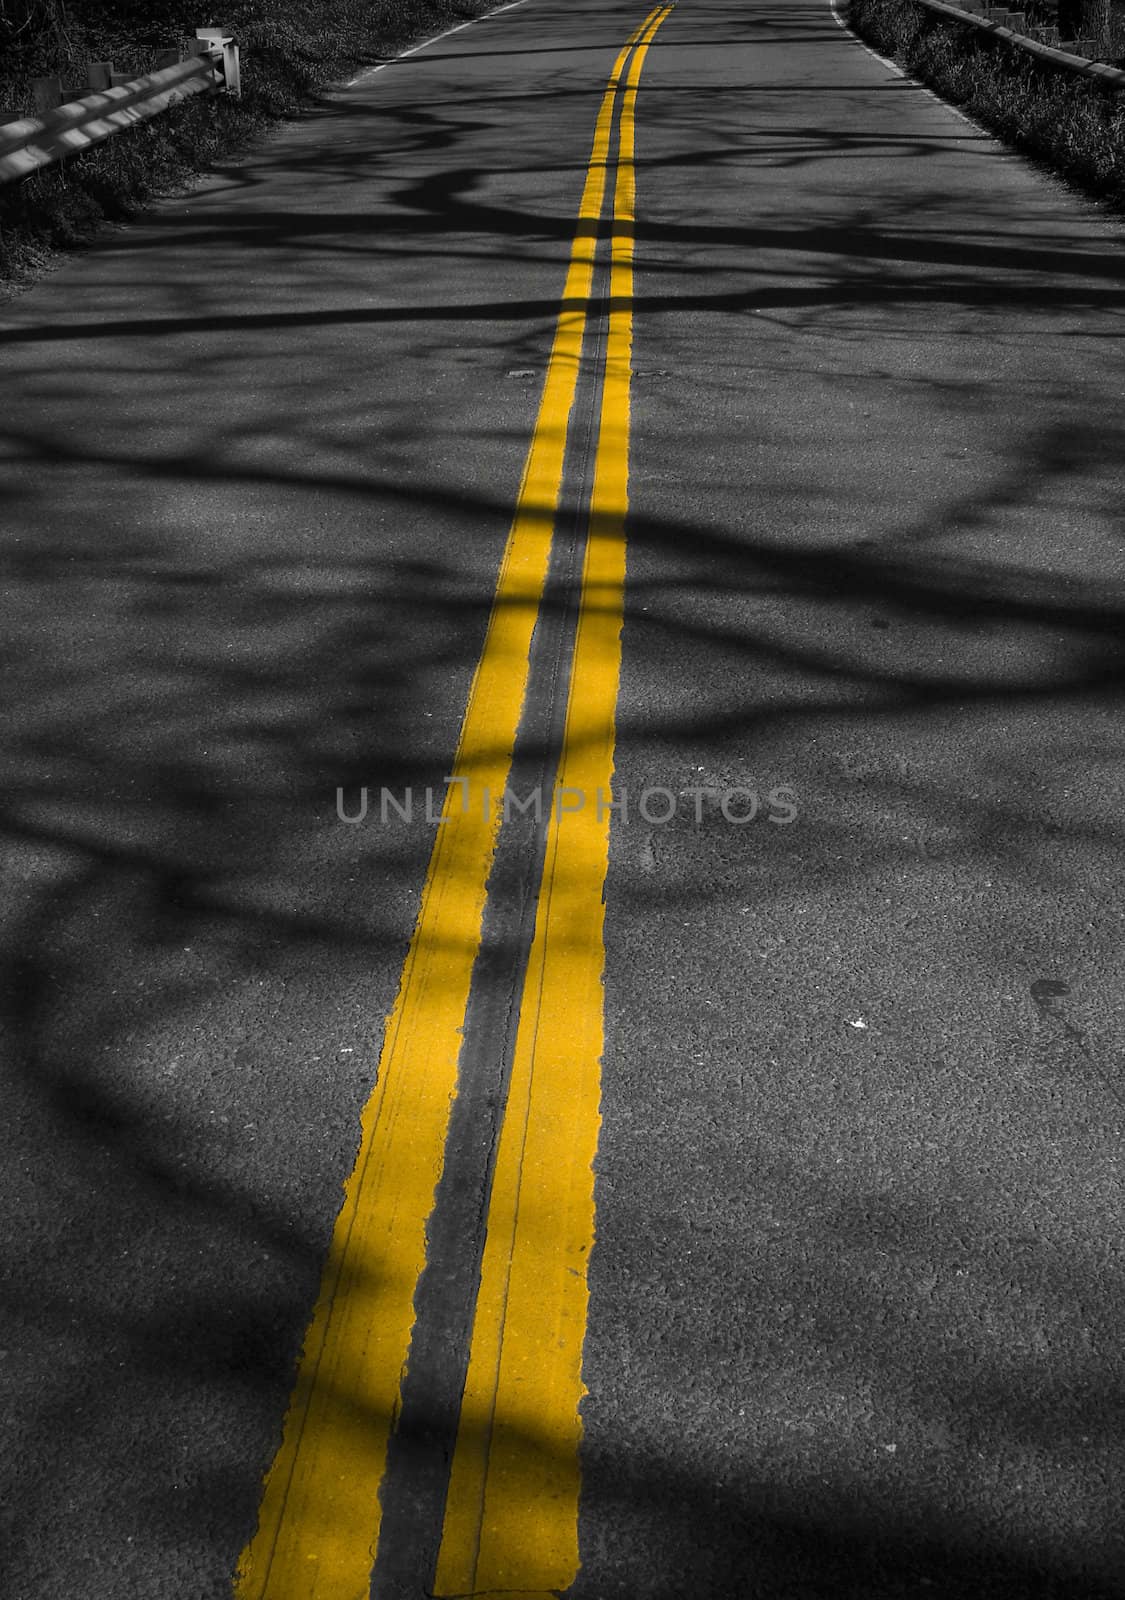 Abstract image of yellow lines on road with shadows